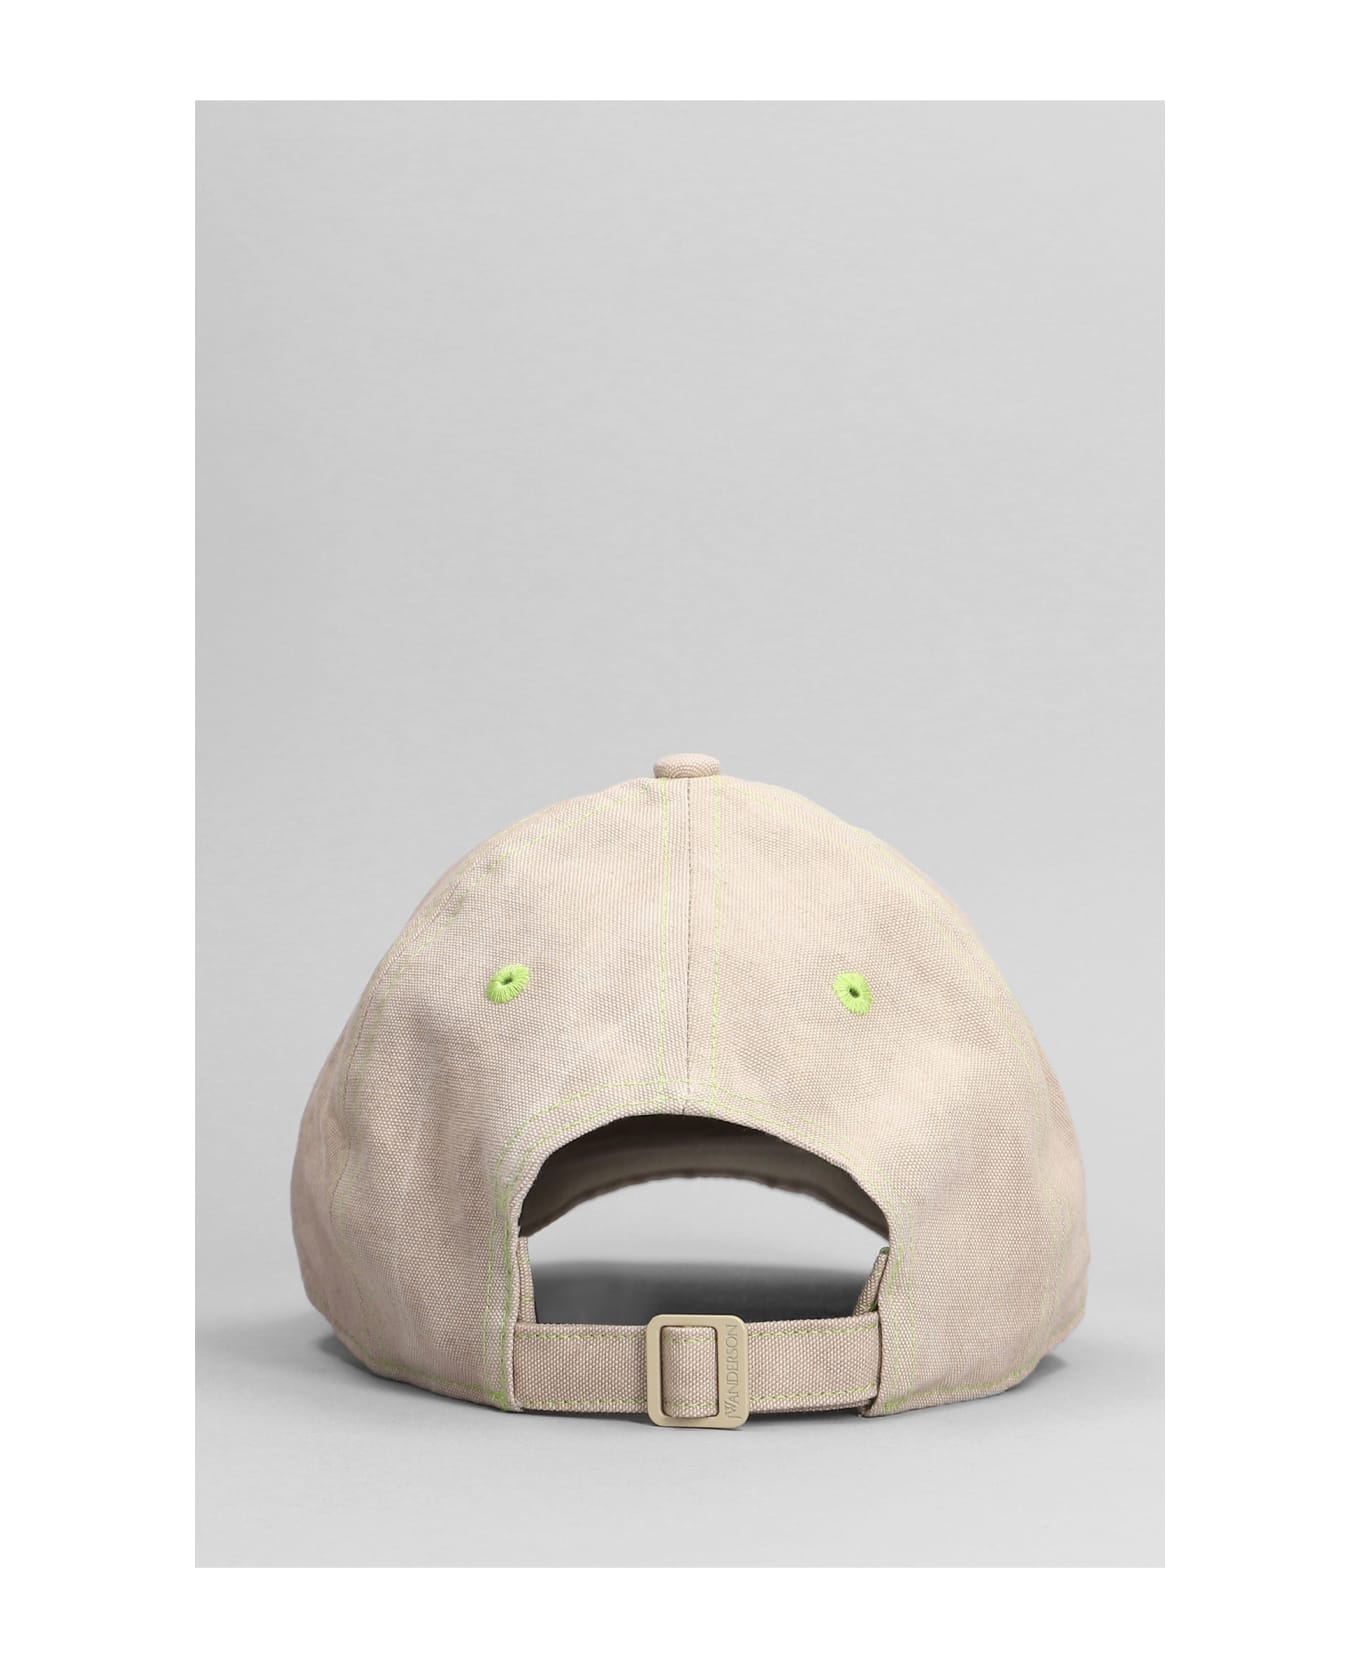 J.W. Anderson Jw Anderson Patched Baseball Cap - PUTTY 帽子